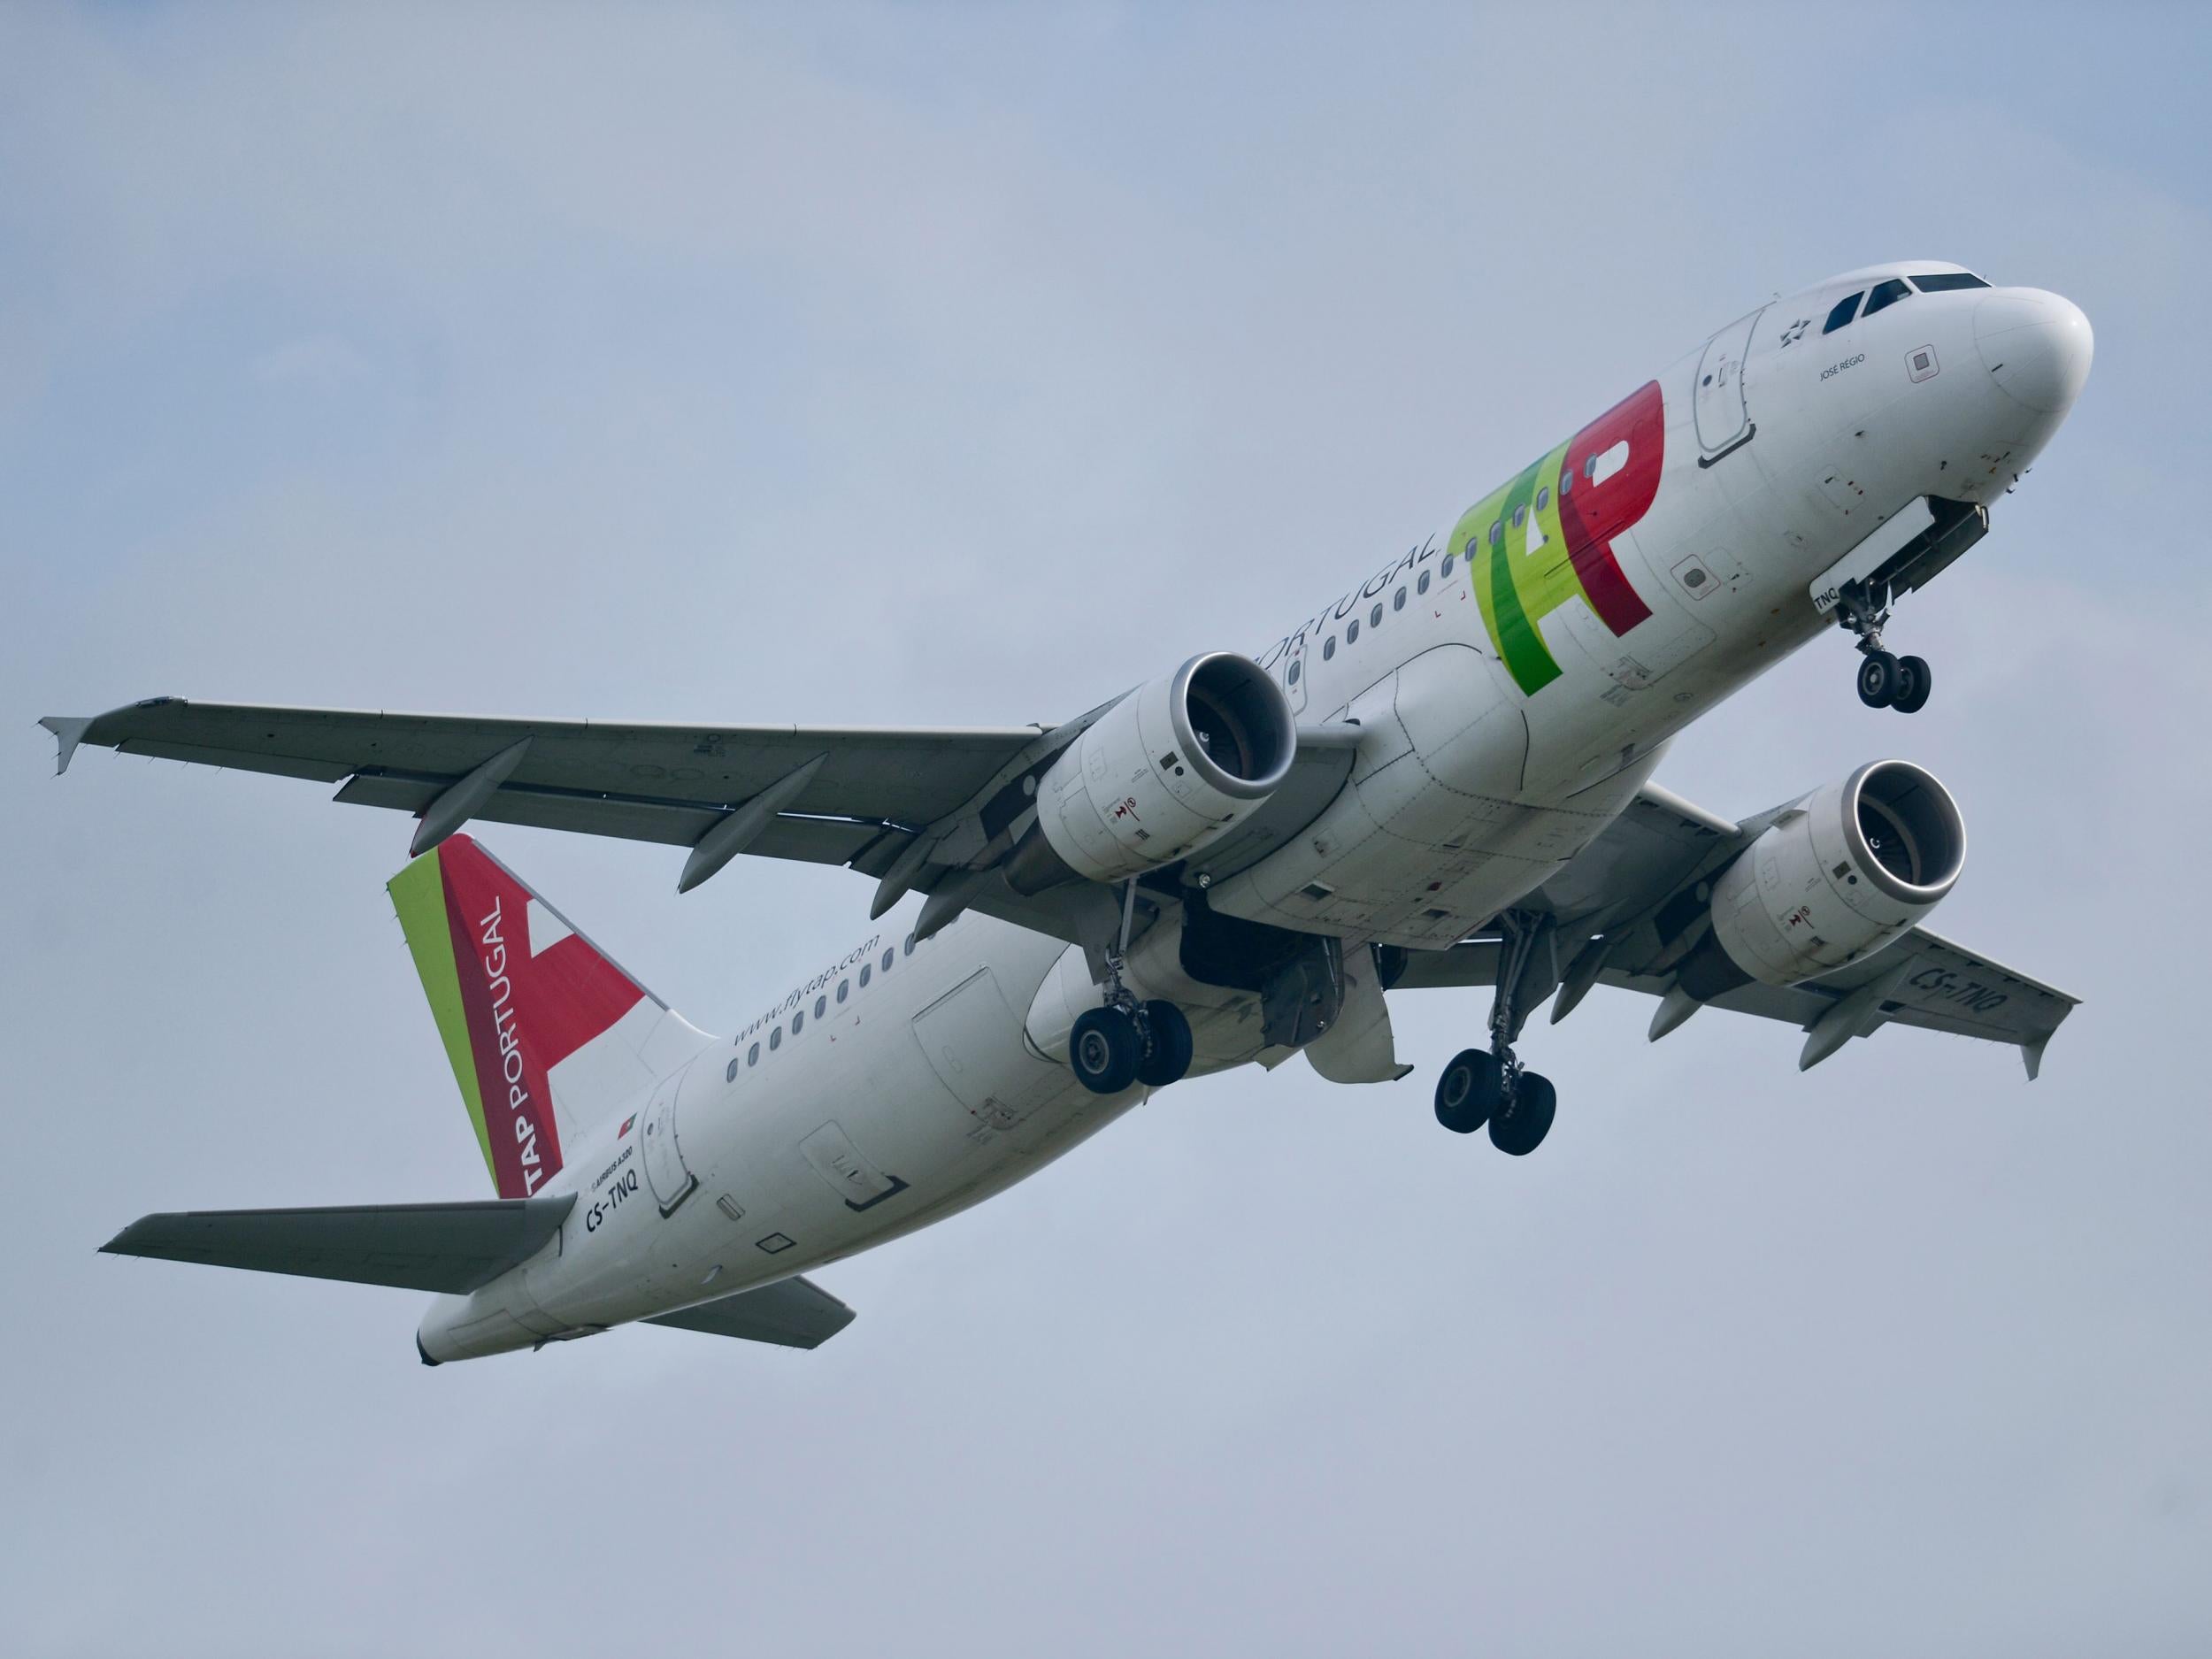 TAP Air Portugal has stated it will take 'the necessary and consequent measures' to deal with its co-pilot